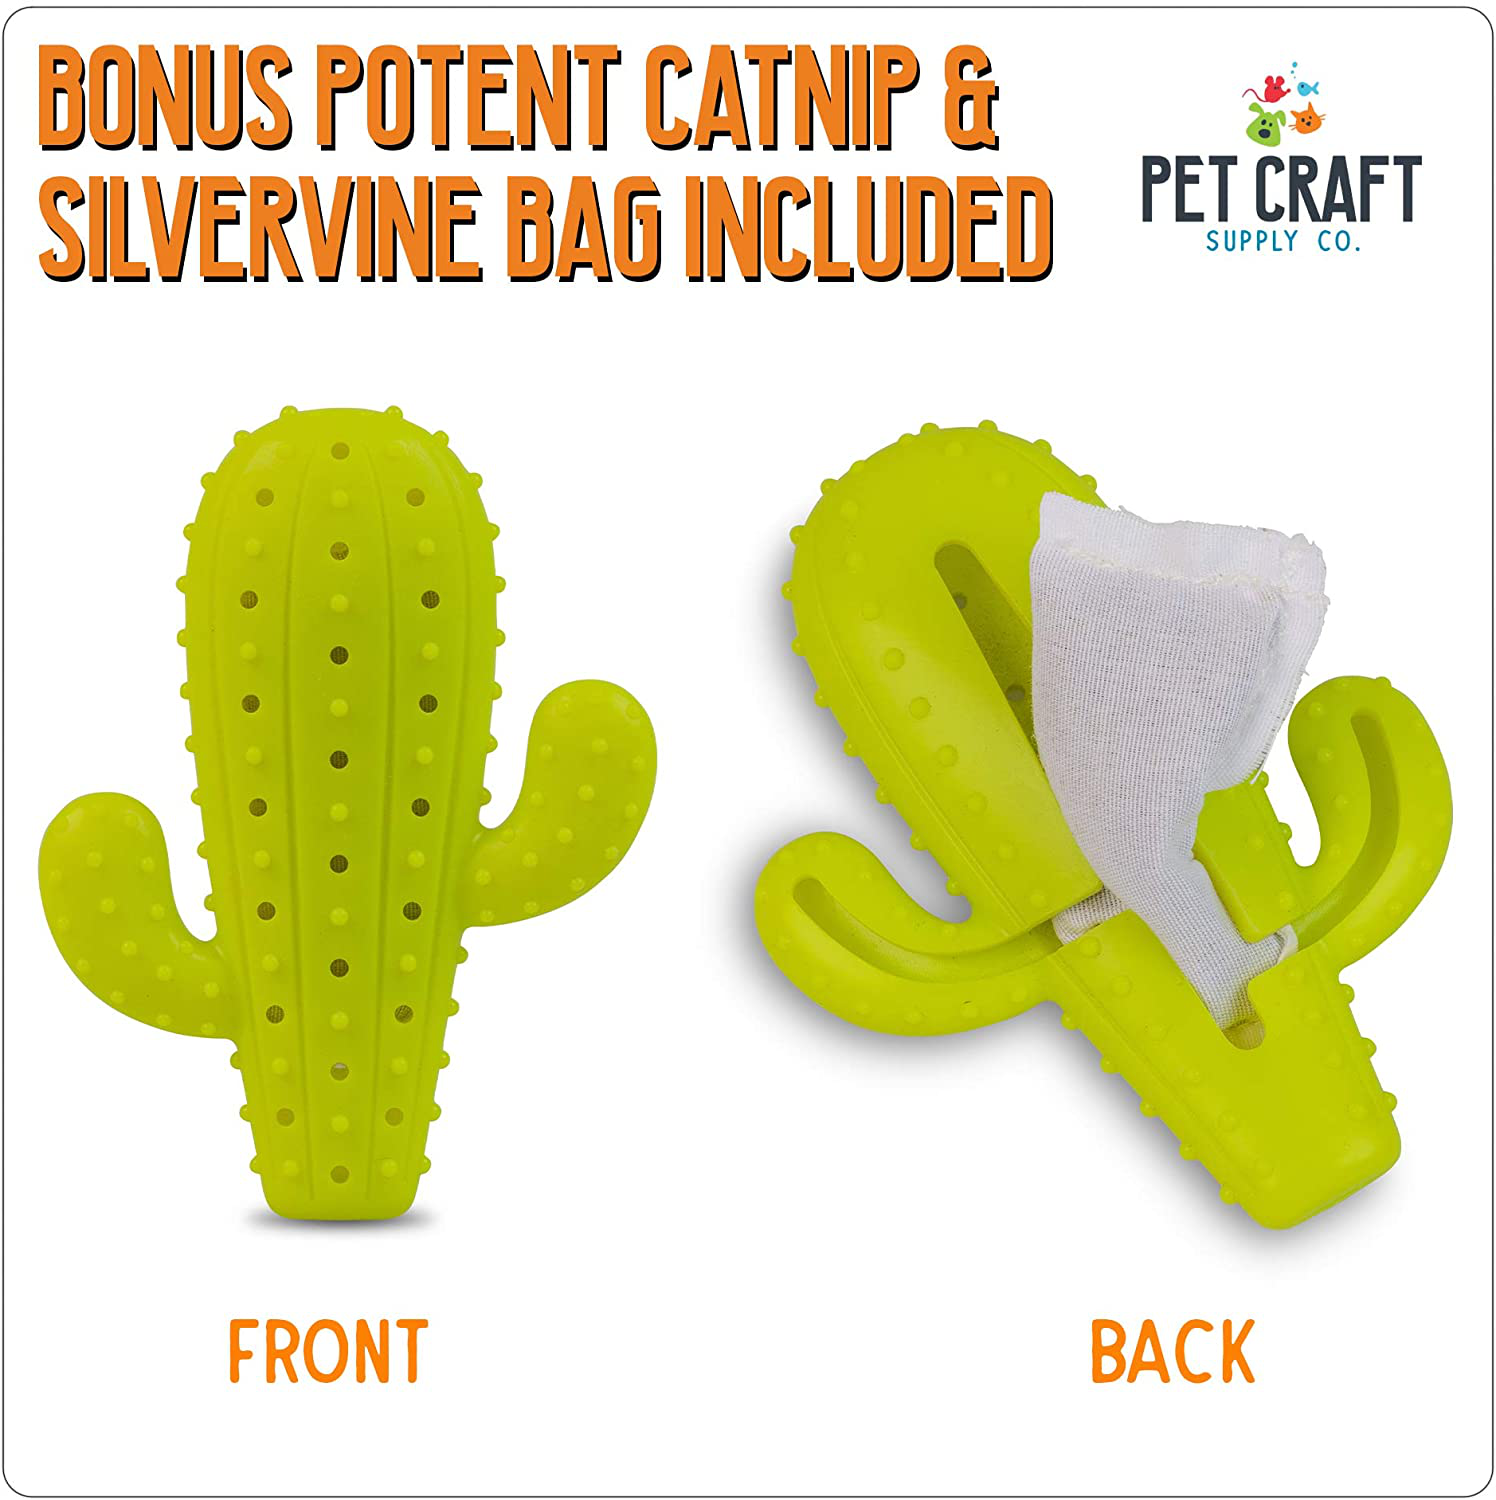 Pet Craft Supply Cactus Interactive Cat Toy Chew Toy Teeth Cleaning Bite Resistant 100% Natural Rubber with Bonus Catnip and Silvervine Bags for Kittens and Adult Cat